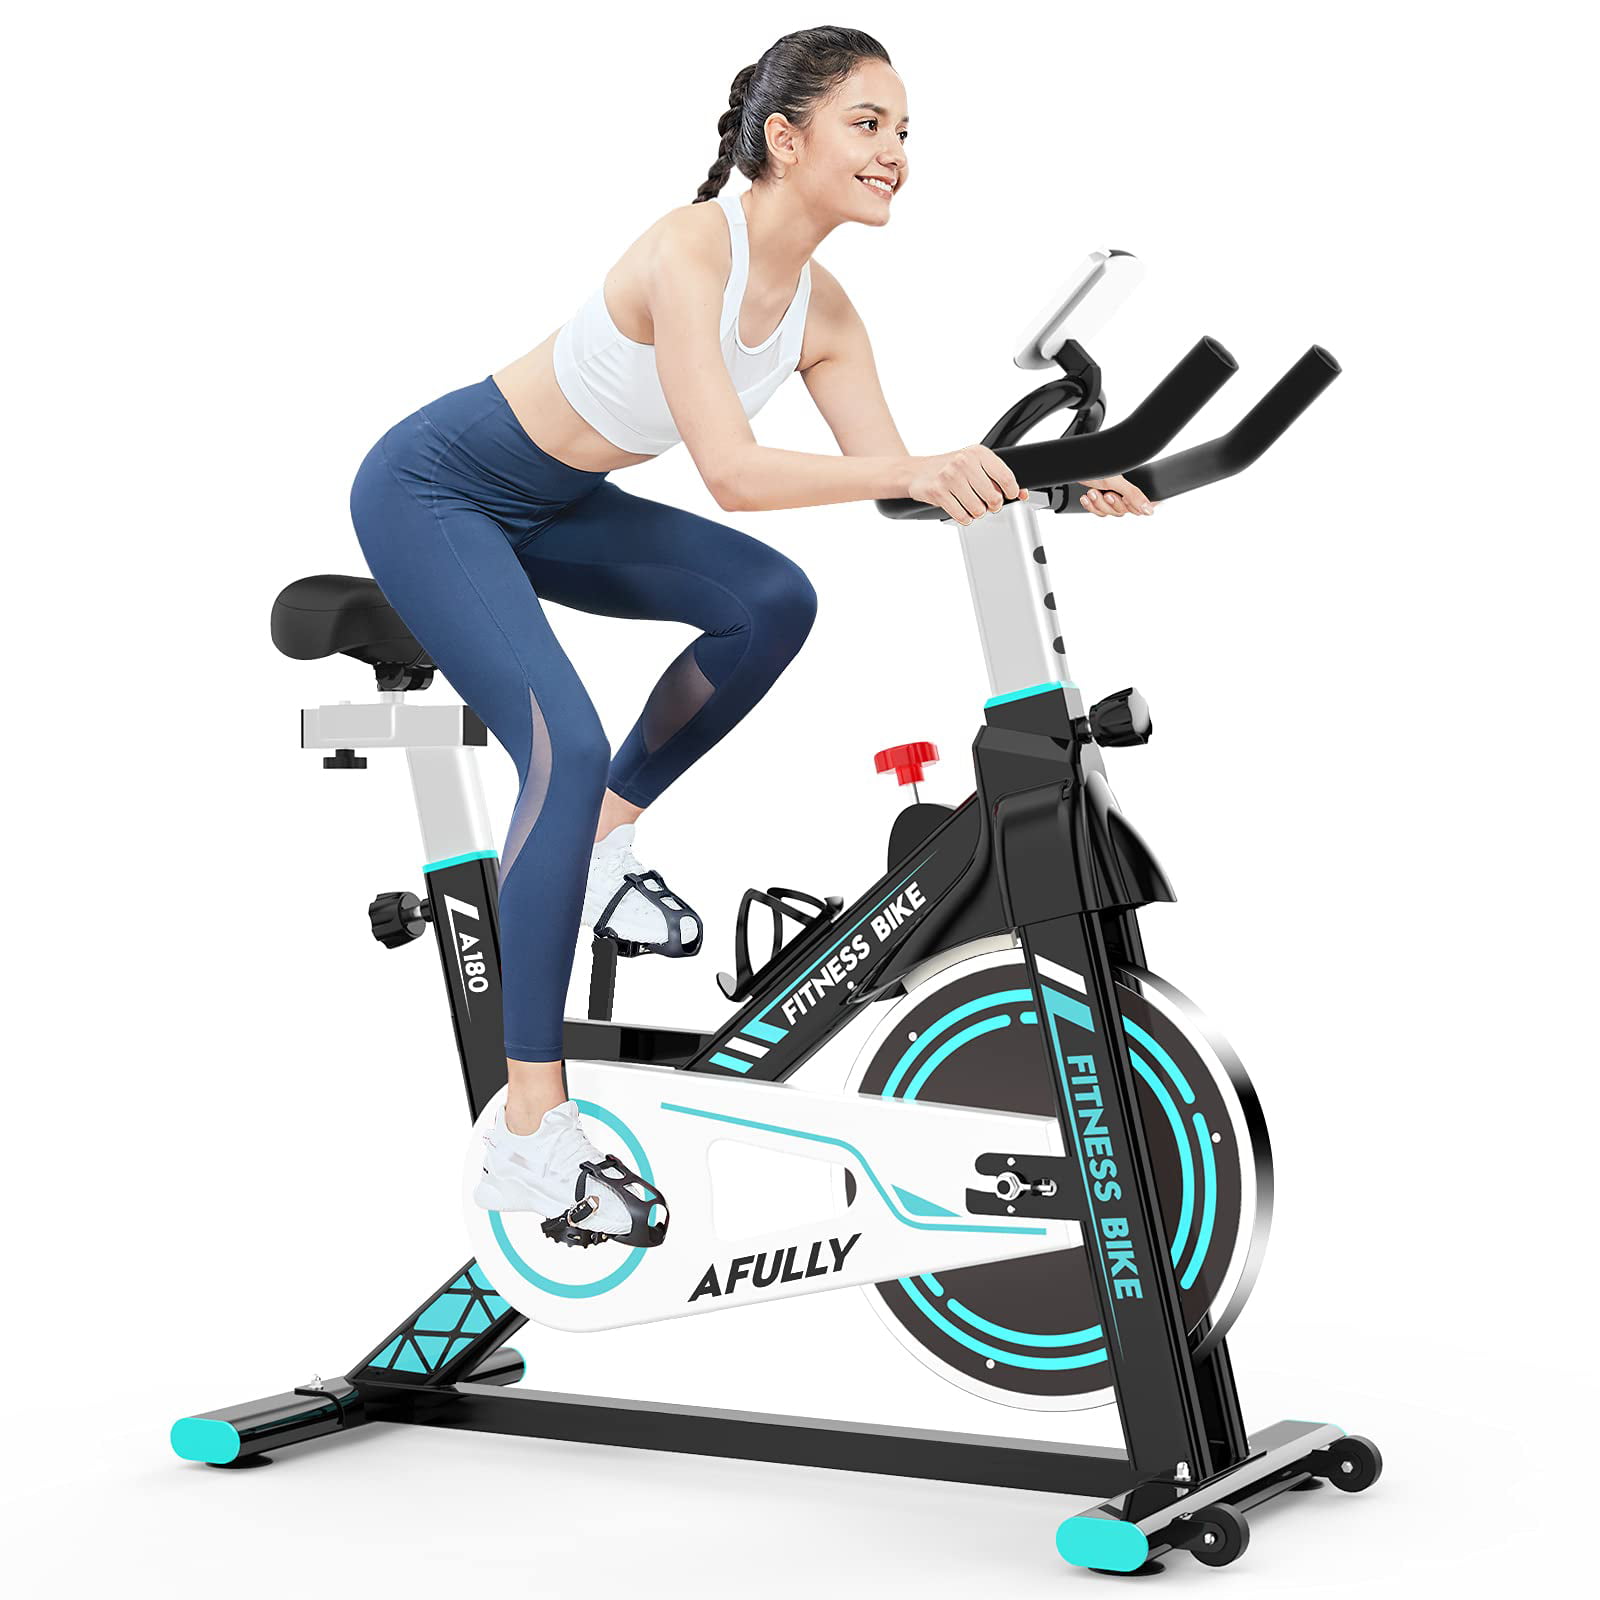 pooboo Stationary Exercise Bike Indoor Cycling Bike with LCD Display and Heavy-Duty Flywheel for Cardio Workout 